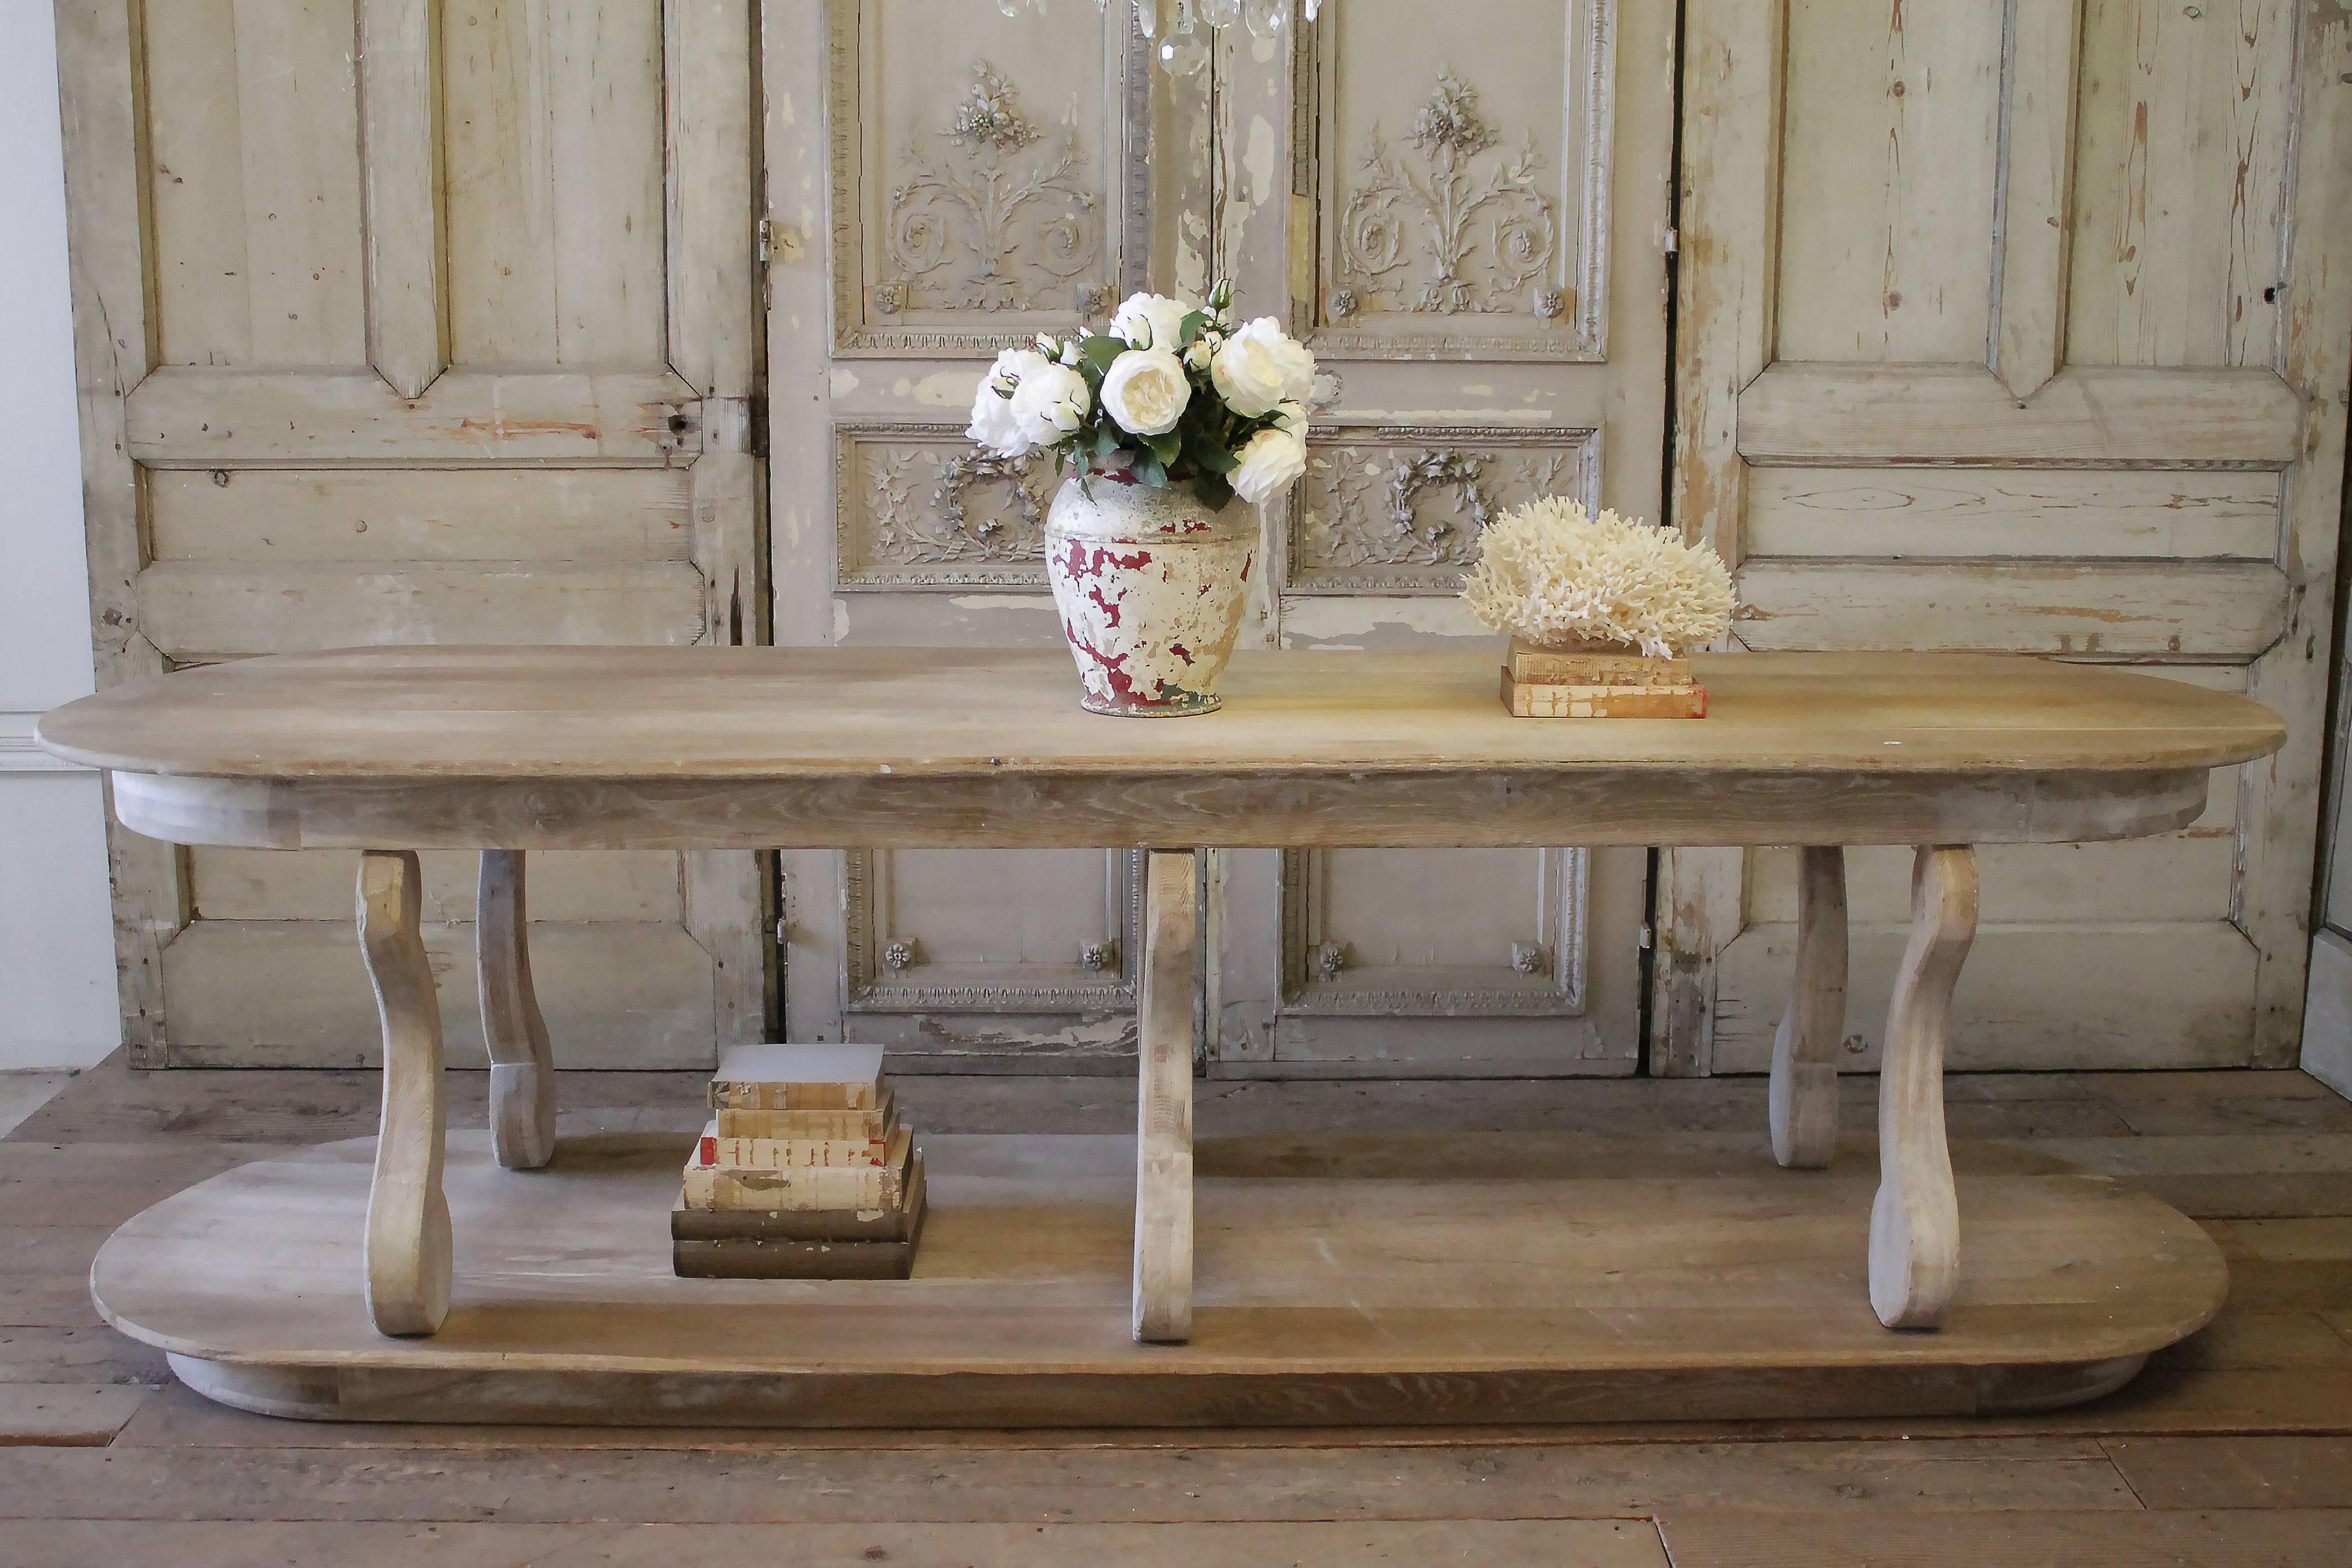 Custom made reclaimed wood console table with 6 corbel style legs. These legs have a bolt in system, which can be removed to disassemble, making the table easier to get into your space.
Measures: 99” L x 26.5